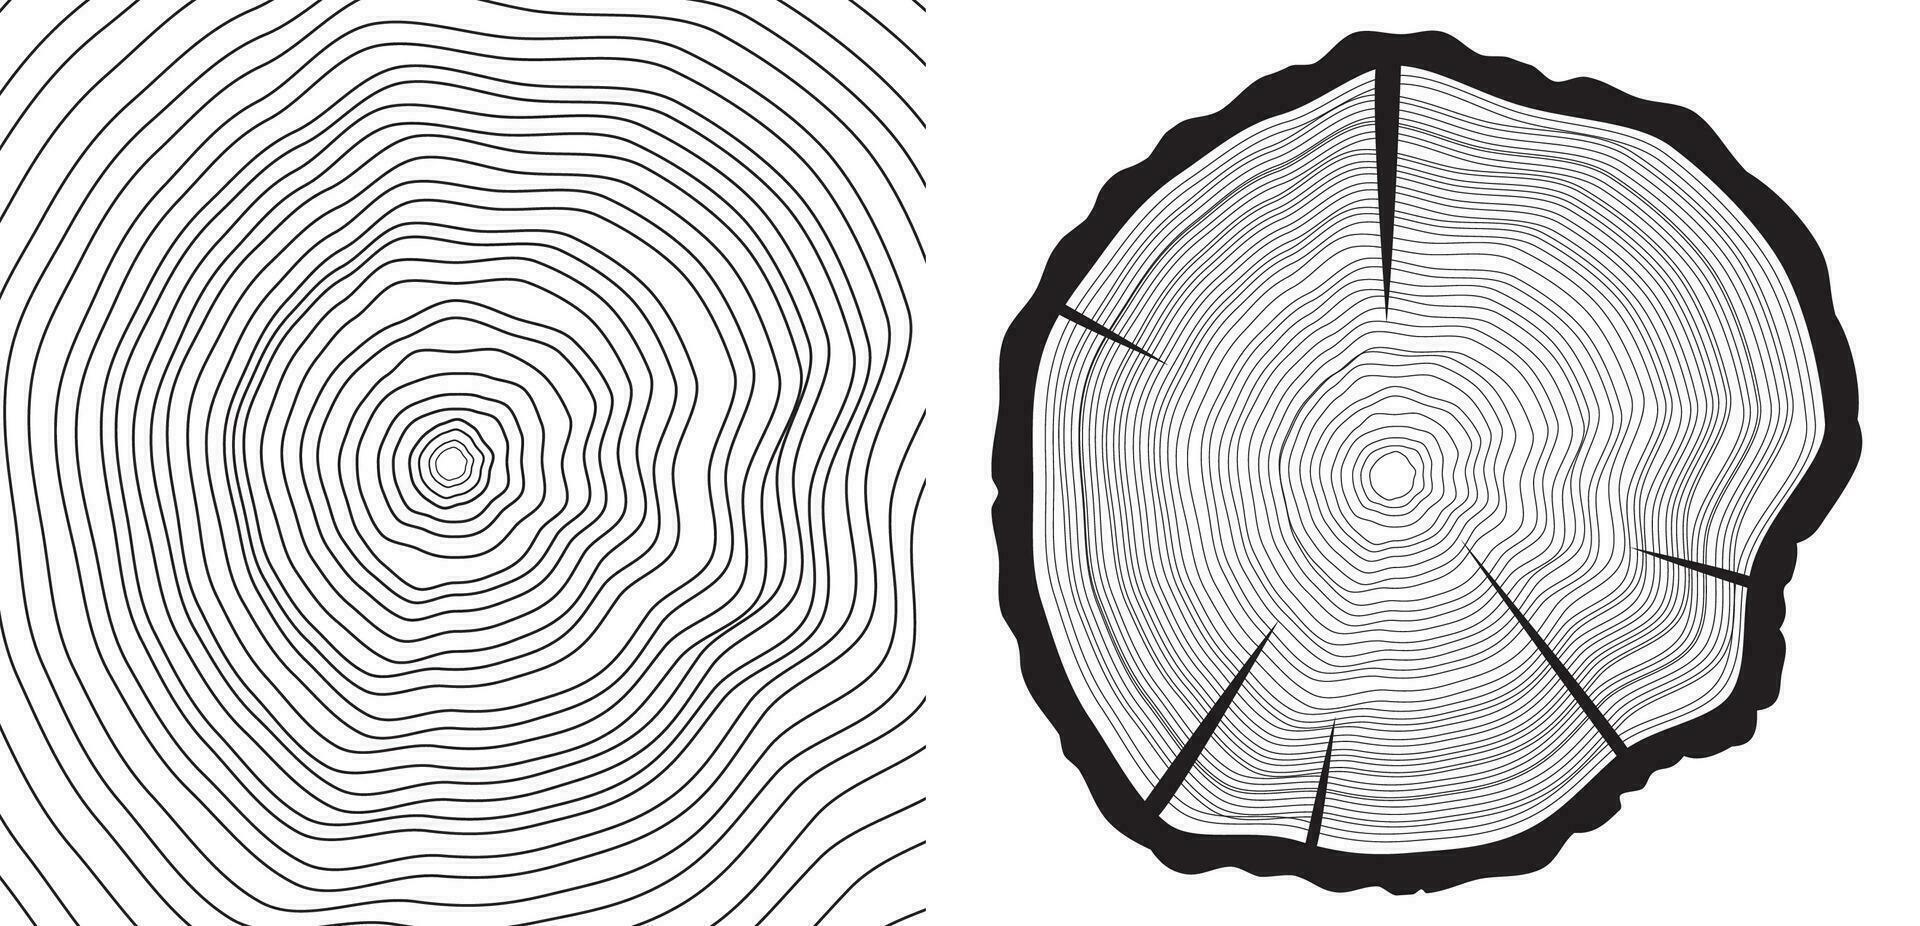 sawcut tree trunk and tree-rings background vector